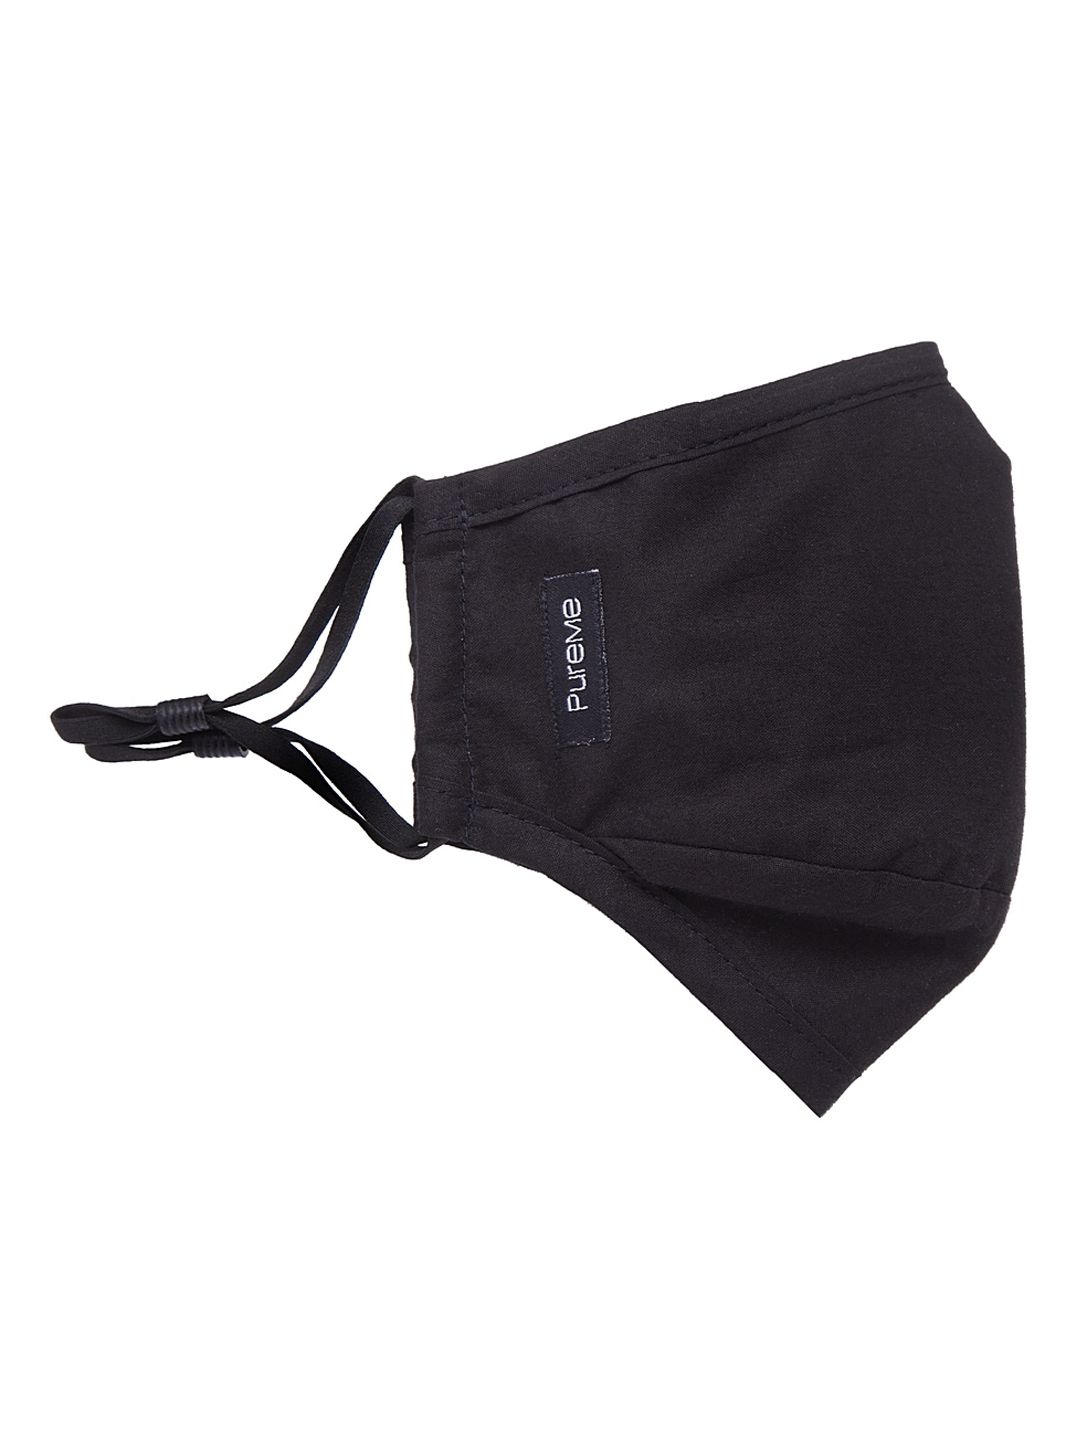 PureMe Air Masks Black Solid 5-Ply Sustainable Cloth Mask Price in India